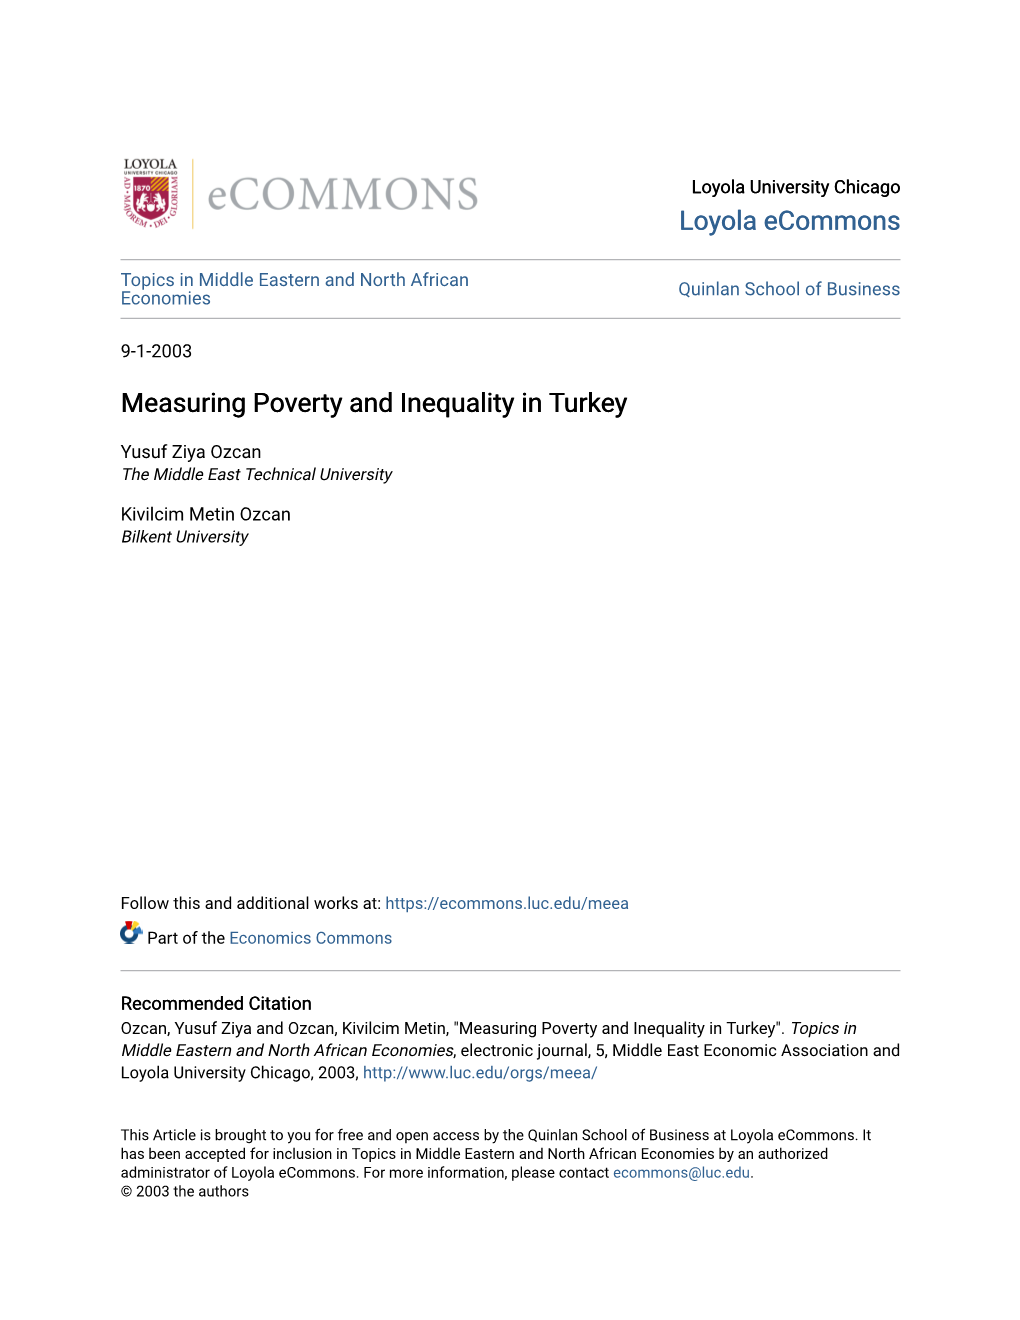 Measuring Poverty and Inequality in Turkey